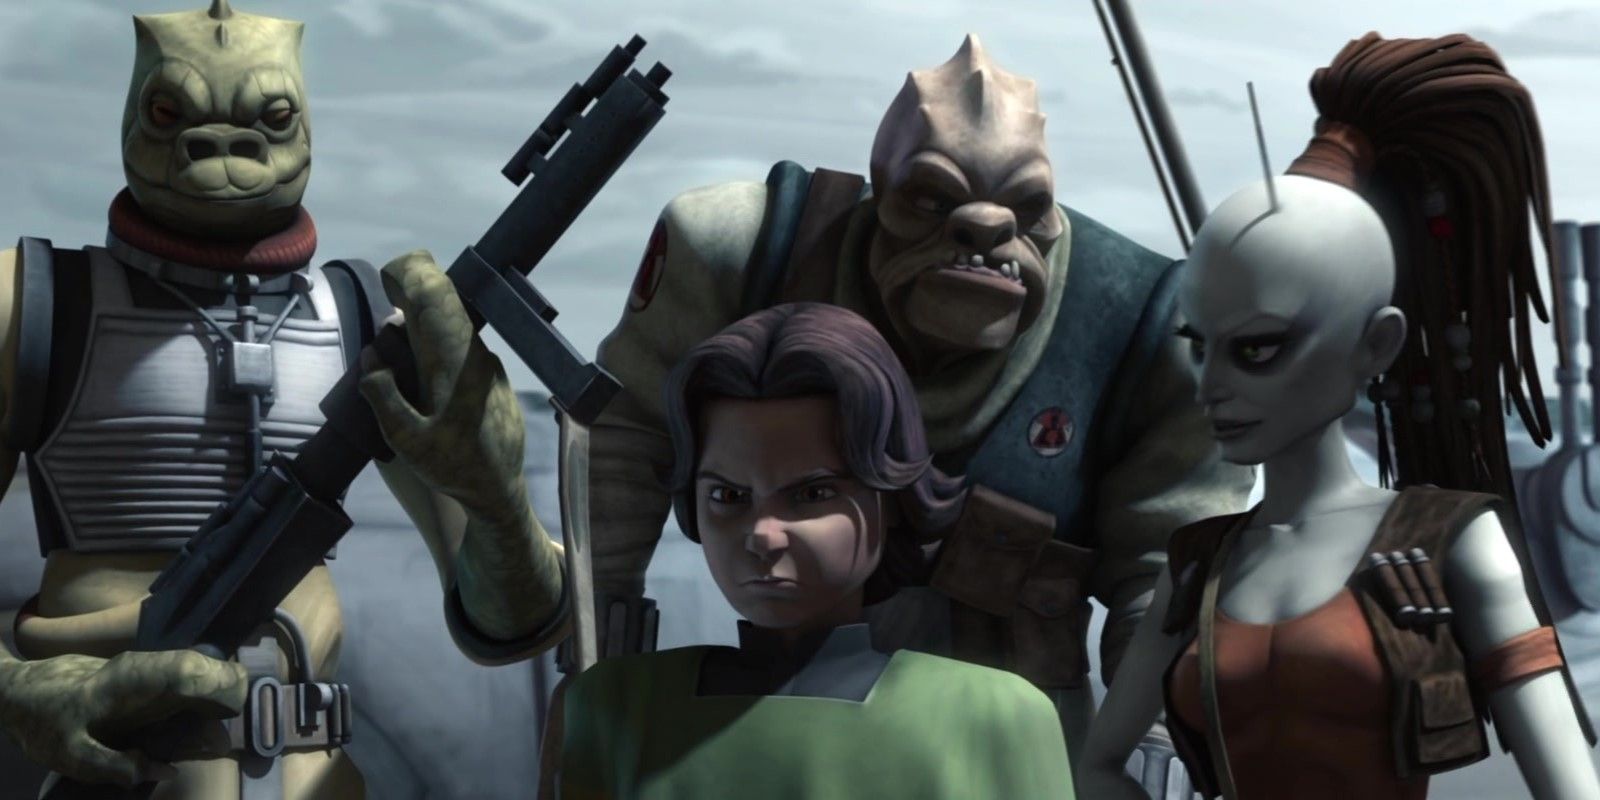 Bossk, Boba Fett, Castas, and Aurra Sing gathered around each other watching an explosion off screen in Star Wars: The Clone Wars season 2 episode 21